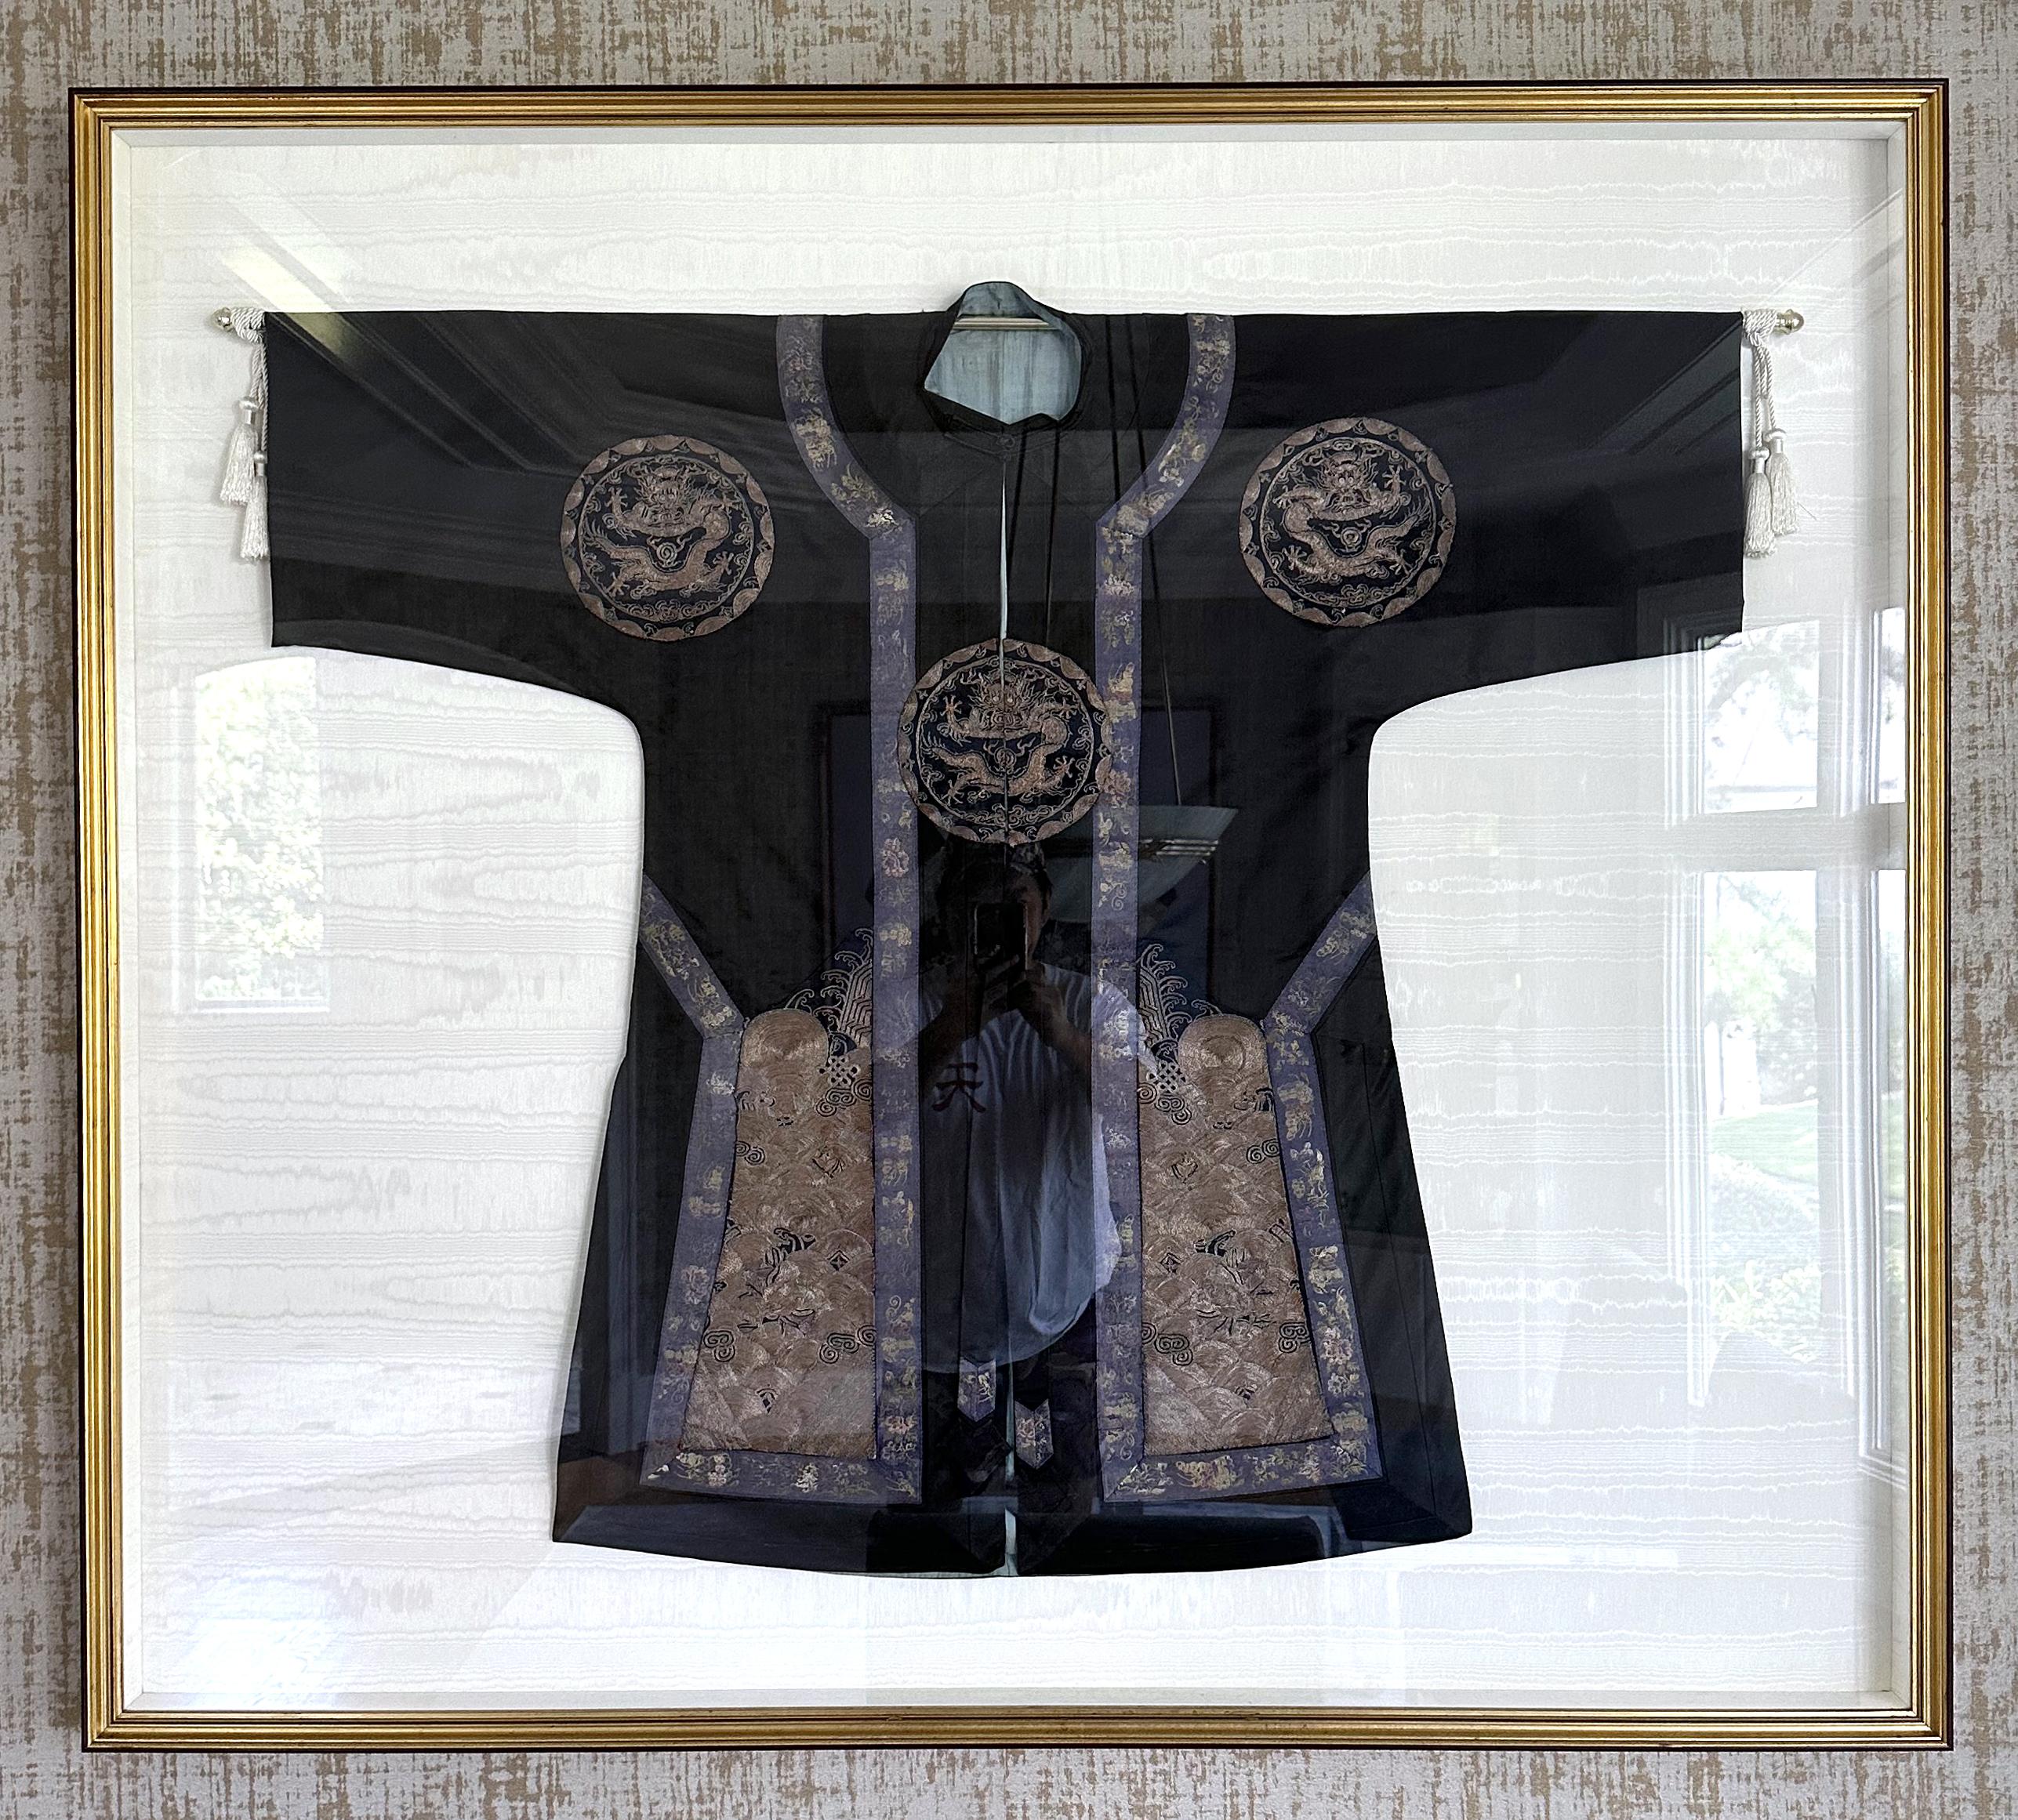 A black silk robe with three medallions of five-clawed dragons and thousands of ocean waves borders, all done in a splendid embroidery with gold bullion threads. A well-preserved piece of textile art dated to end of Qing Dynasty, circa late 19th